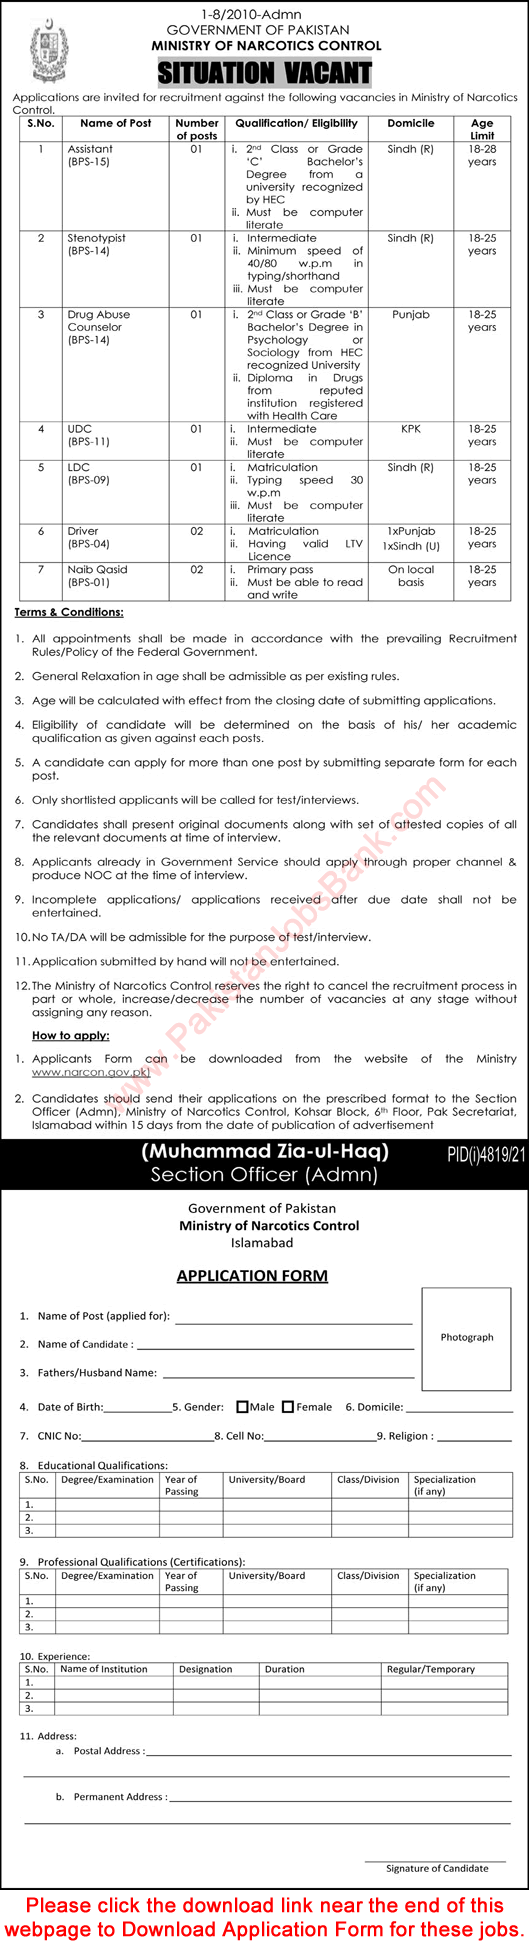 Ministry of Narcotics Control Islamabad Jobs 2022 Application Form Clerks, Naib Qasid & Others Latest